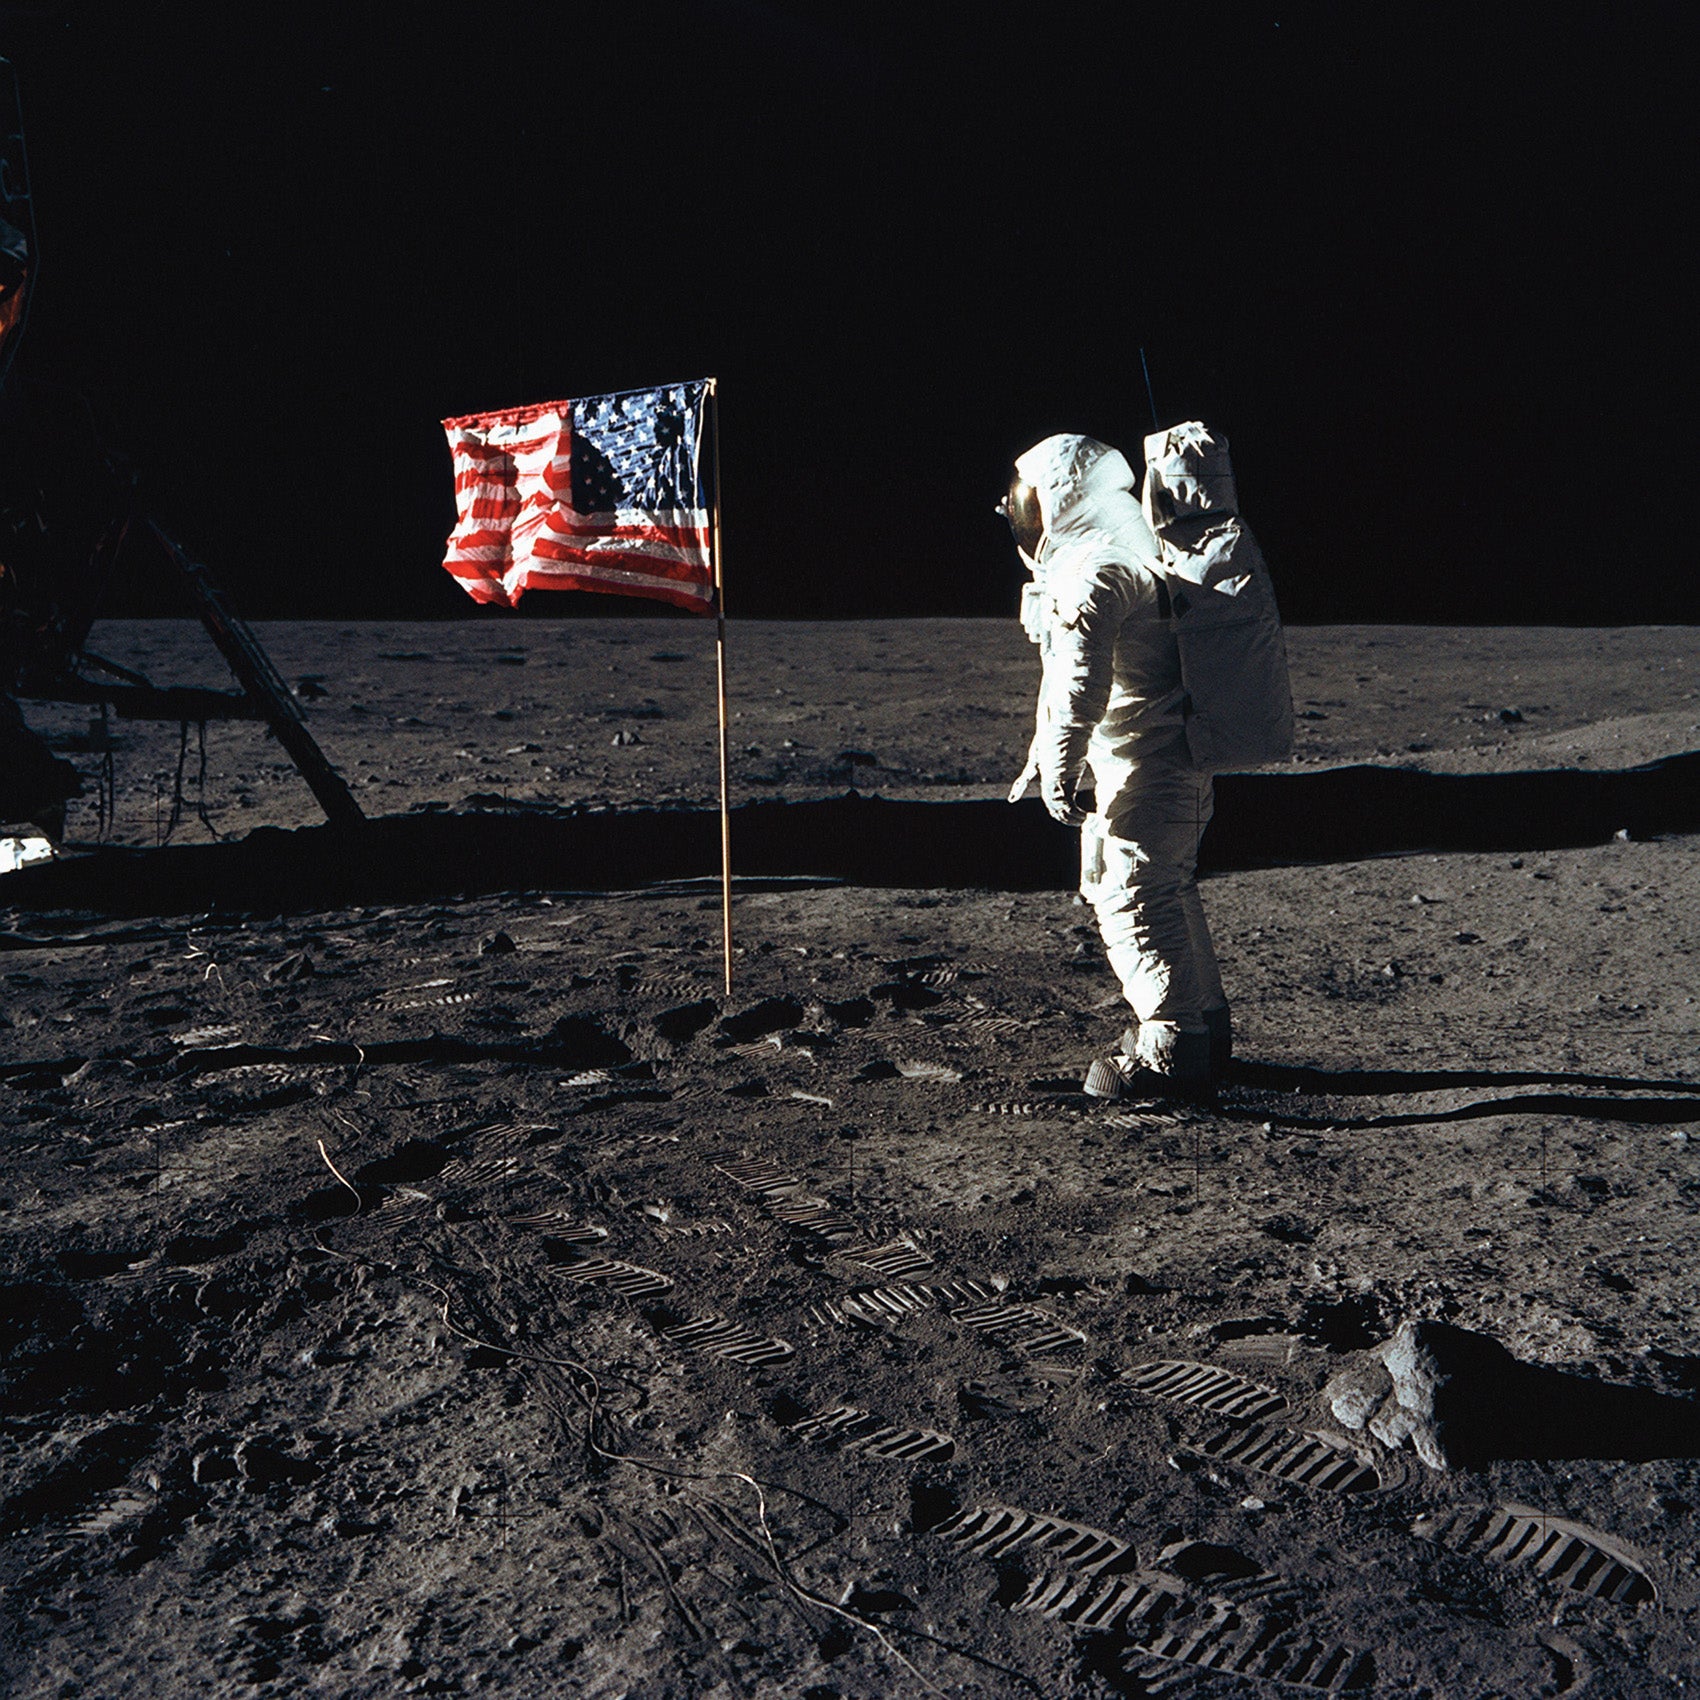 Astronaut Buzz Aldrin posed on the moon besides the U.S. flag